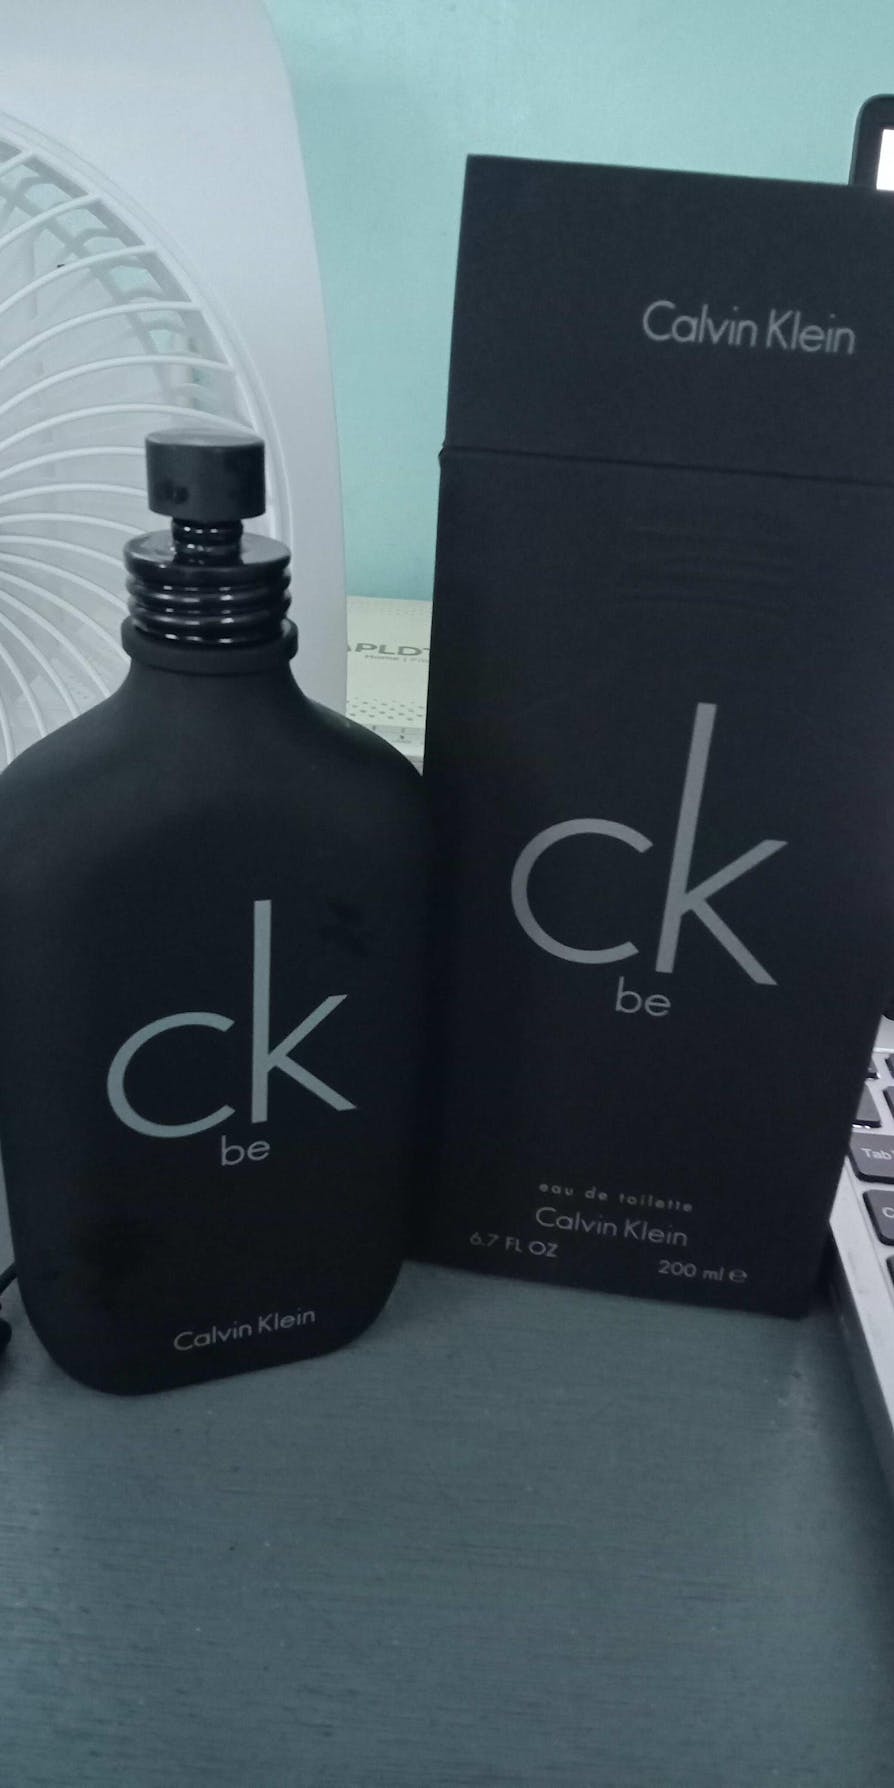 Buy Calvin Klein CK BE 200ml for P2995.00 Only!